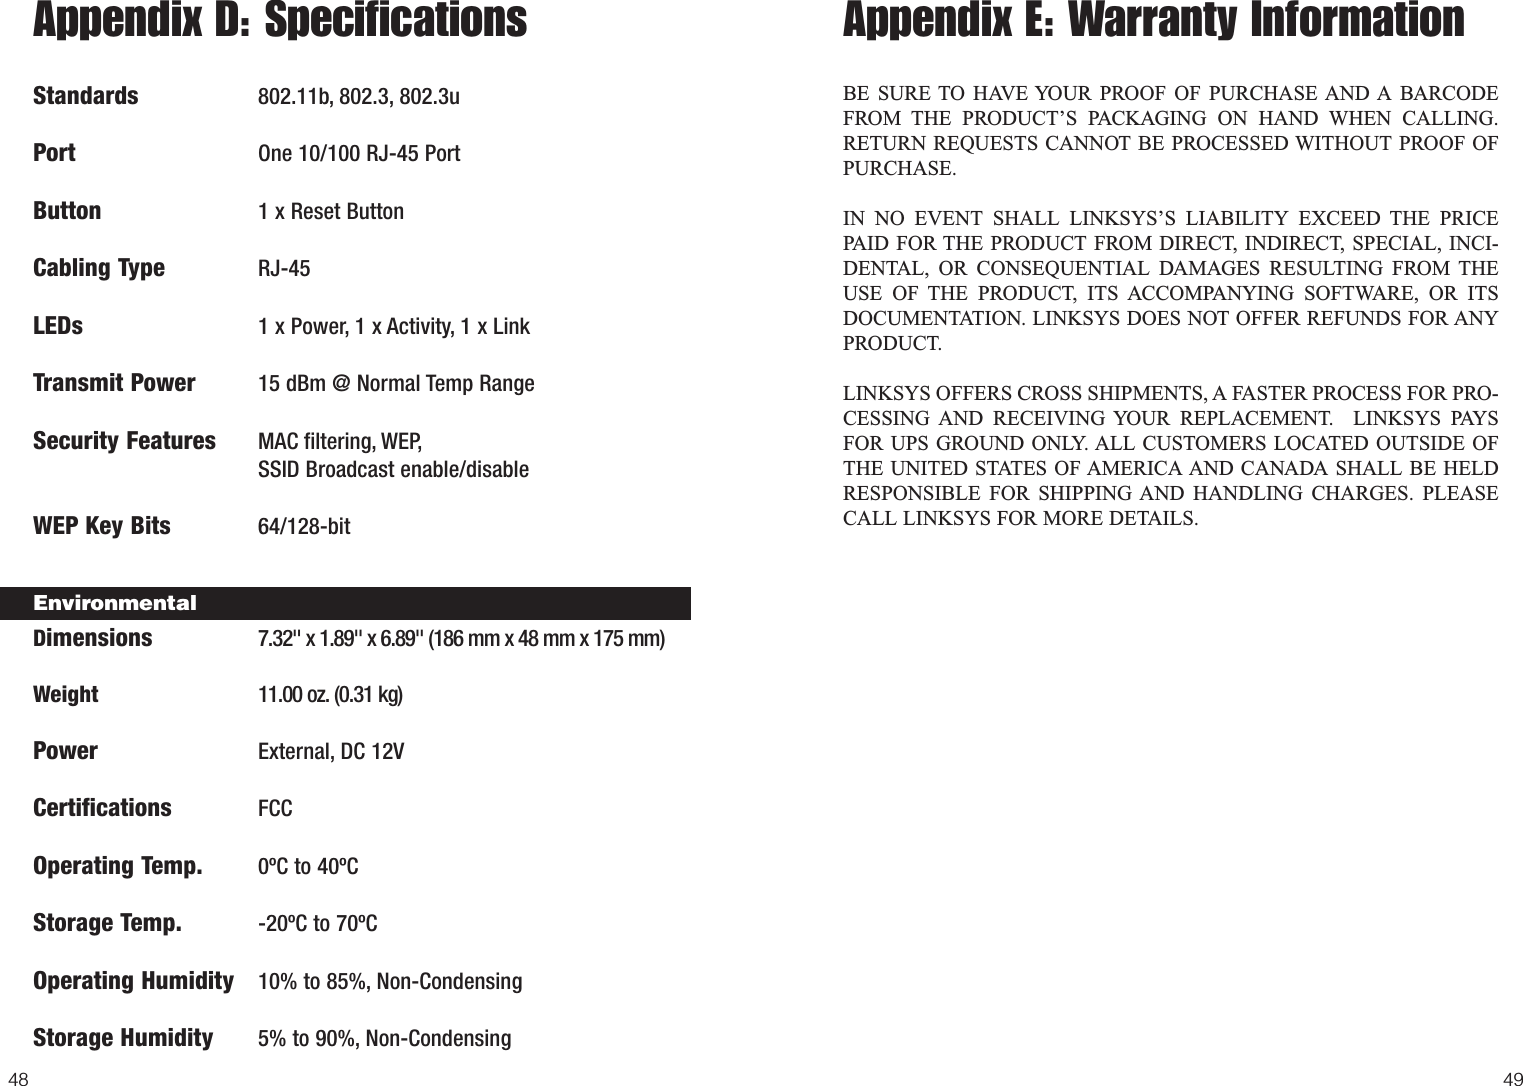 49Appendix E: Warranty InformationBE SURE TO HAVE YOUR PROOF OF PURCHASE AND A BARCODEFROM THE PRODUCT’S PACKAGING ON HAND WHEN CALLING.RETURN REQUESTS CANNOT BE PROCESSED WITHOUT PROOF OFPURCHASE. IN NO EVENT SHALL LINKSYS’S LIABILITY EXCEED THE PRICEPAID FOR THE PRODUCT FROM DIRECT, INDIRECT, SPECIAL, INCI-DENTAL, OR CONSEQUENTIAL DAMAGES RESULTING FROM THEUSE OF THE PRODUCT, ITS ACCOMPANYING SOFTWARE, OR ITSDOCUMENTATION. LINKSYS DOES NOT OFFER REFUNDS FOR ANYPRODUCT. LINKSYS OFFERS CROSS SHIPMENTS, A FASTER PROCESS FOR PRO-CESSING AND RECEIVING YOUR REPLACEMENT.  LINKSYS PAYSFOR UPS GROUND ONLY. ALL CUSTOMERS LOCATED OUTSIDE OFTHE UNITED STATES OF AMERICA AND CANADA SHALL BE HELDRESPONSIBLE FOR SHIPPING AND HANDLING CHARGES. PLEASECALL LINKSYS FOR MORE DETAILS.Appendix D: SpecificationsStandards 802.11b, 802.3, 802.3uPort One 10/100 RJ-45 PortButton 1 x Reset ButtonCabling Type RJ-45LEDs 1 x Power, 1 x Activity, 1 x LinkTransmit Power 15 dBm @ Normal Temp RangeSecurity Features MAC filtering, WEP,SSID Broadcast enable/disableWEP Key Bits 64/128-bitDimensions 7.32&quot; x 1.89&quot; x 6.89&quot; (186 mm x 48 mm x 175 mm)Weight 11.00 oz. (0.31 kg)PowerExternal,DC 12VCertificationsFCCOperating Temp. 0ºC to 40ºCStorage Temp. -20ºC to 70ºCOperating Humidity 10% to 85%, Non-CondensingStorage Humidity 5% to 90%, Non-Condensing48Environmental